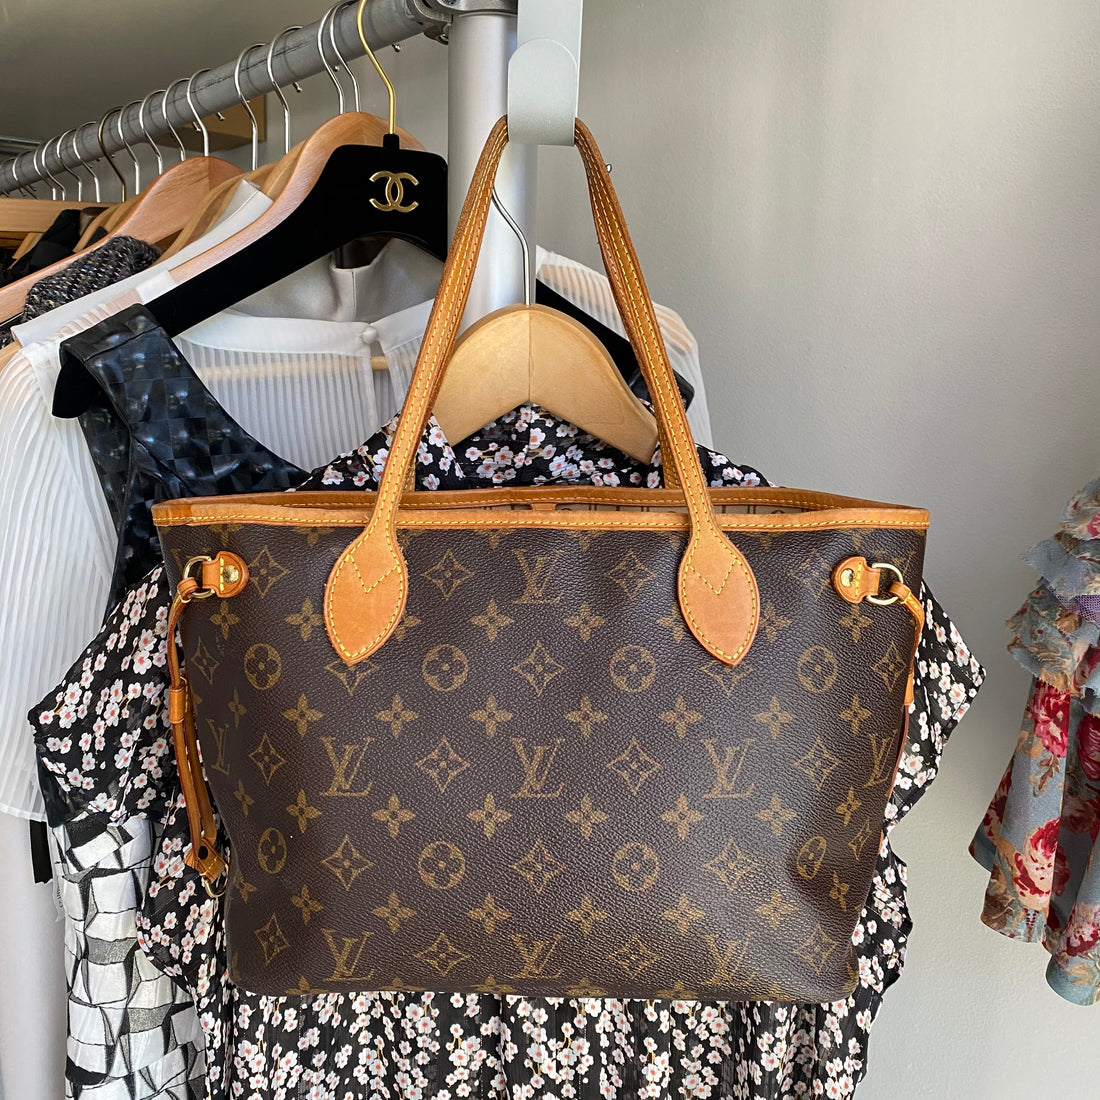 Brown Louis Vuitton Monogram Neverfull PM Tote Bag, RvceShops Revival